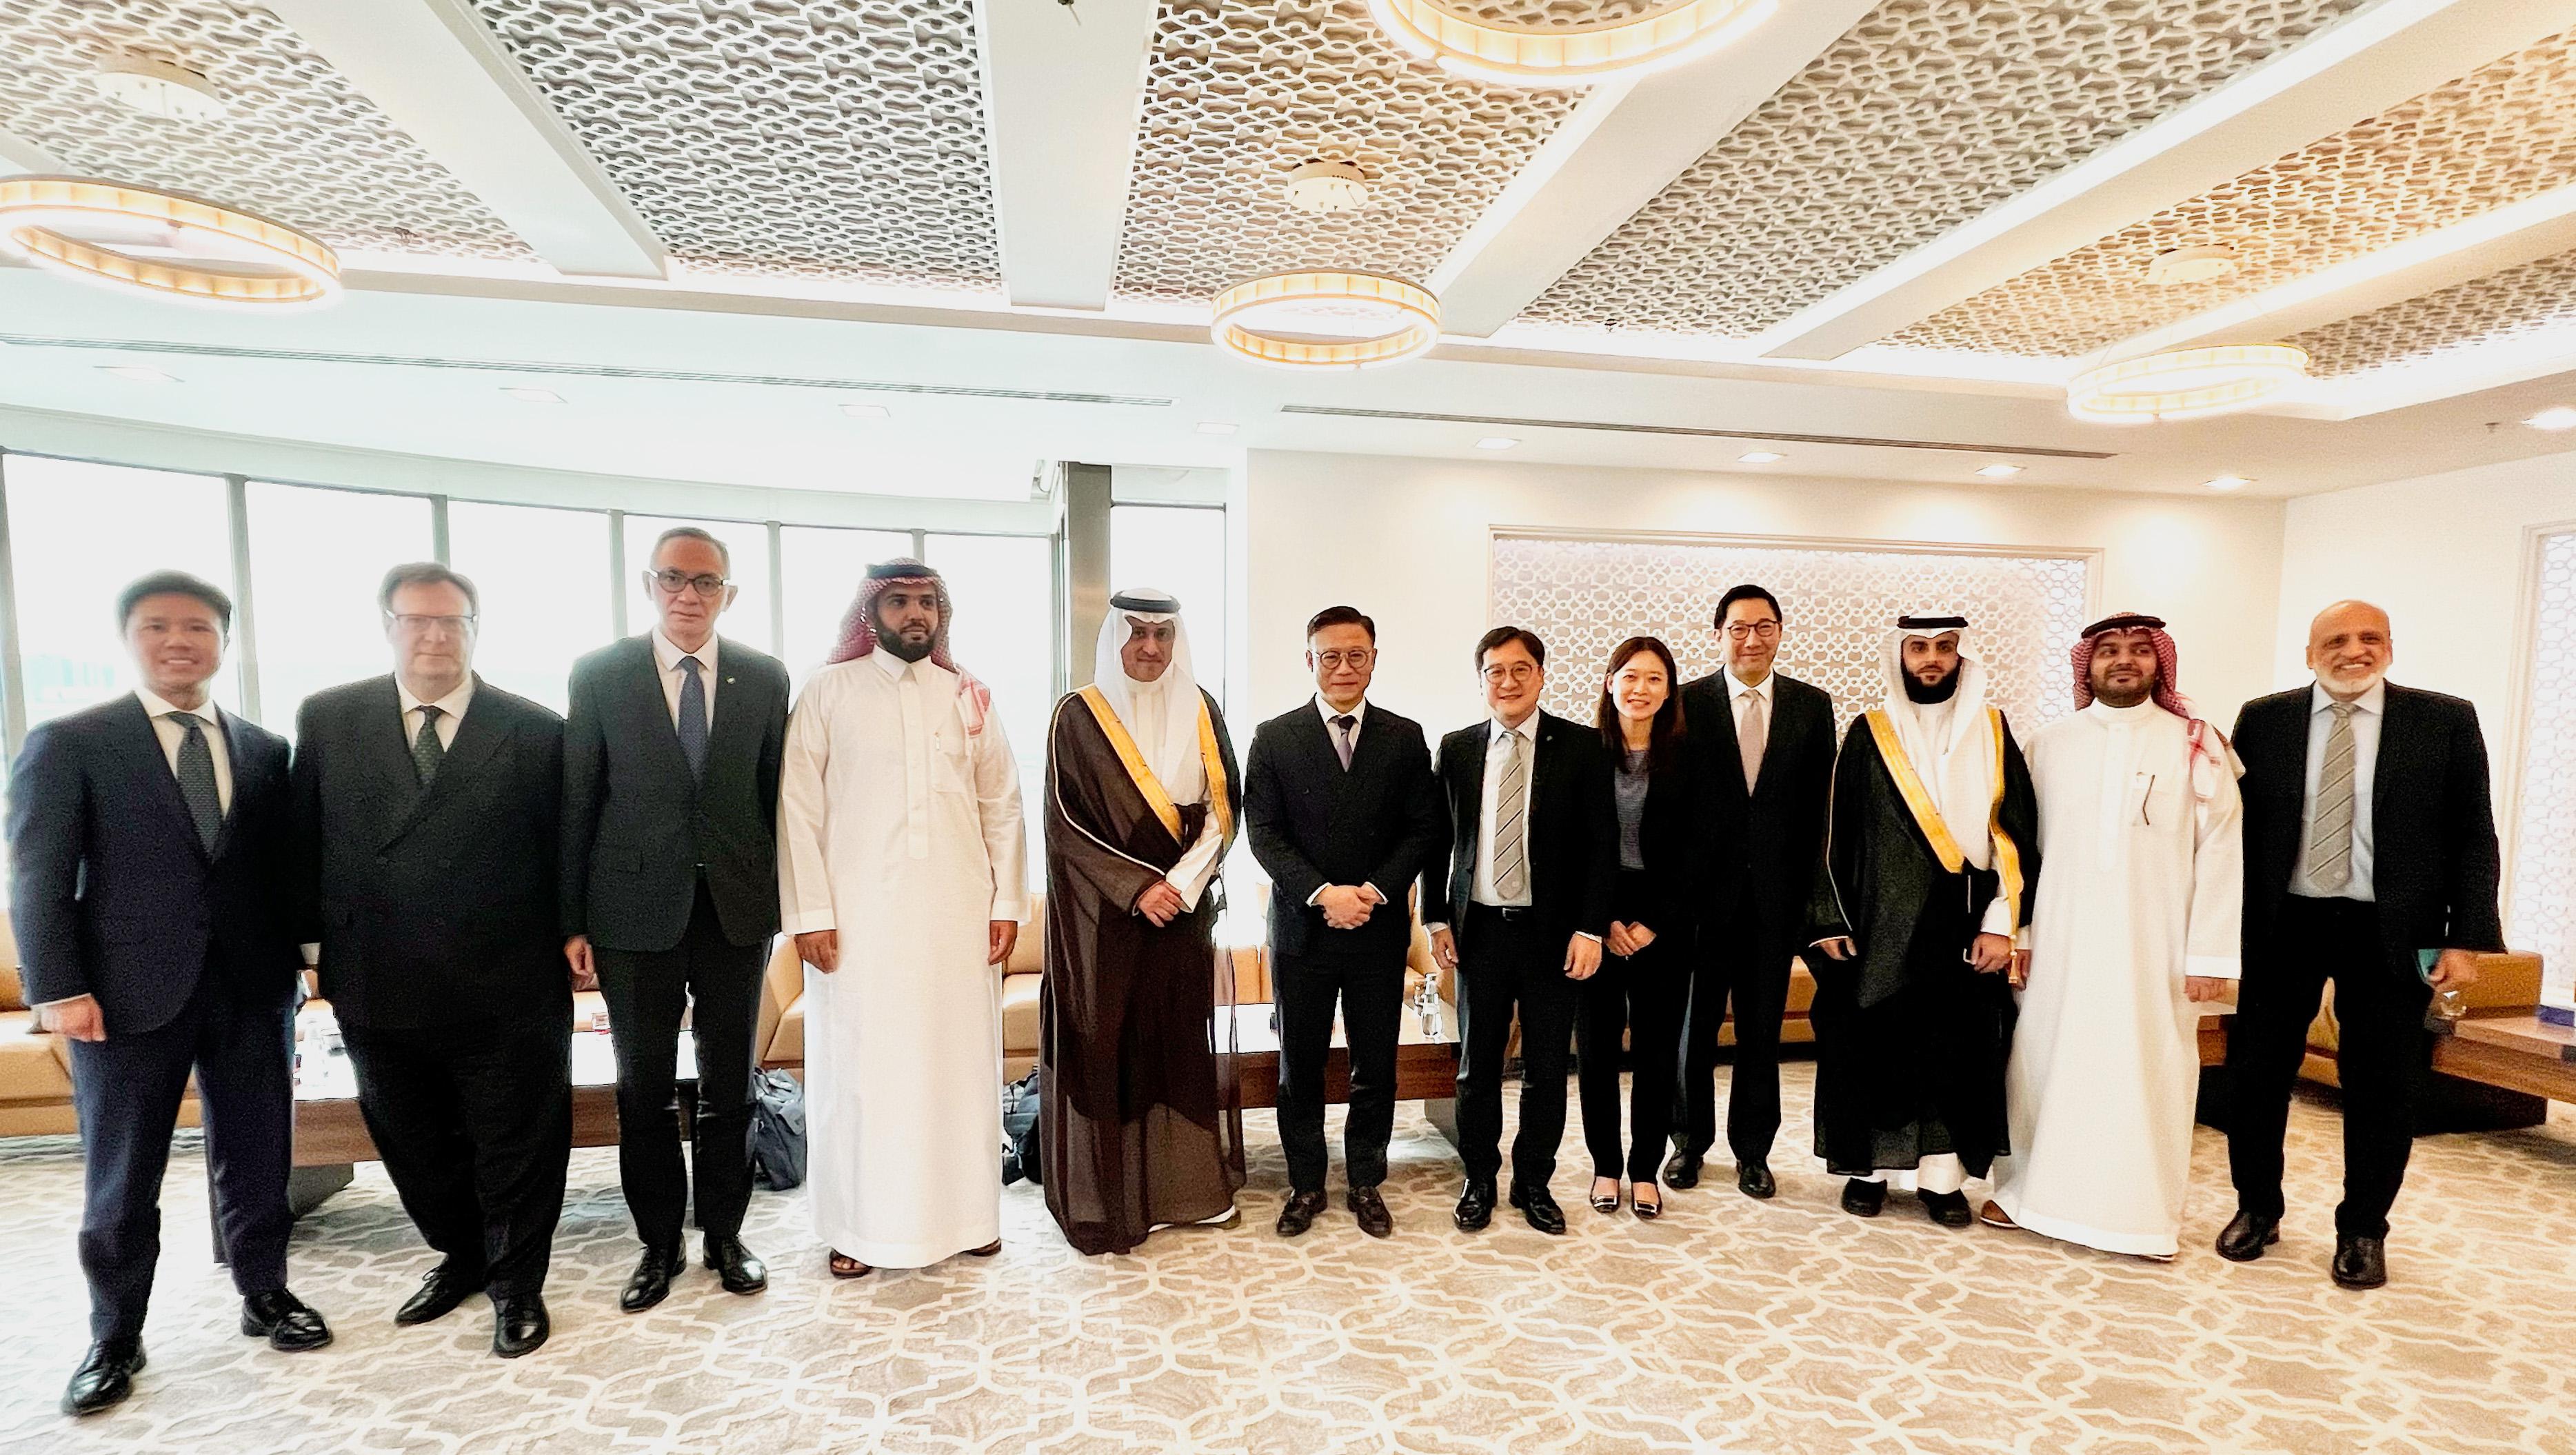 The Deputy Secretary for Justice, Mr Cheung Kwok-kwan (sixth left) and the delegation are pictured with the Vice-Minister of Justice of the Kingdom of Saudi Arabia, Dr Najem bin Abdullah al-Zaid (fifth left), and other senior government officials related to the administration of justice in Riyadh, Saudi Arabia, on March 4 (Riyadh time).
